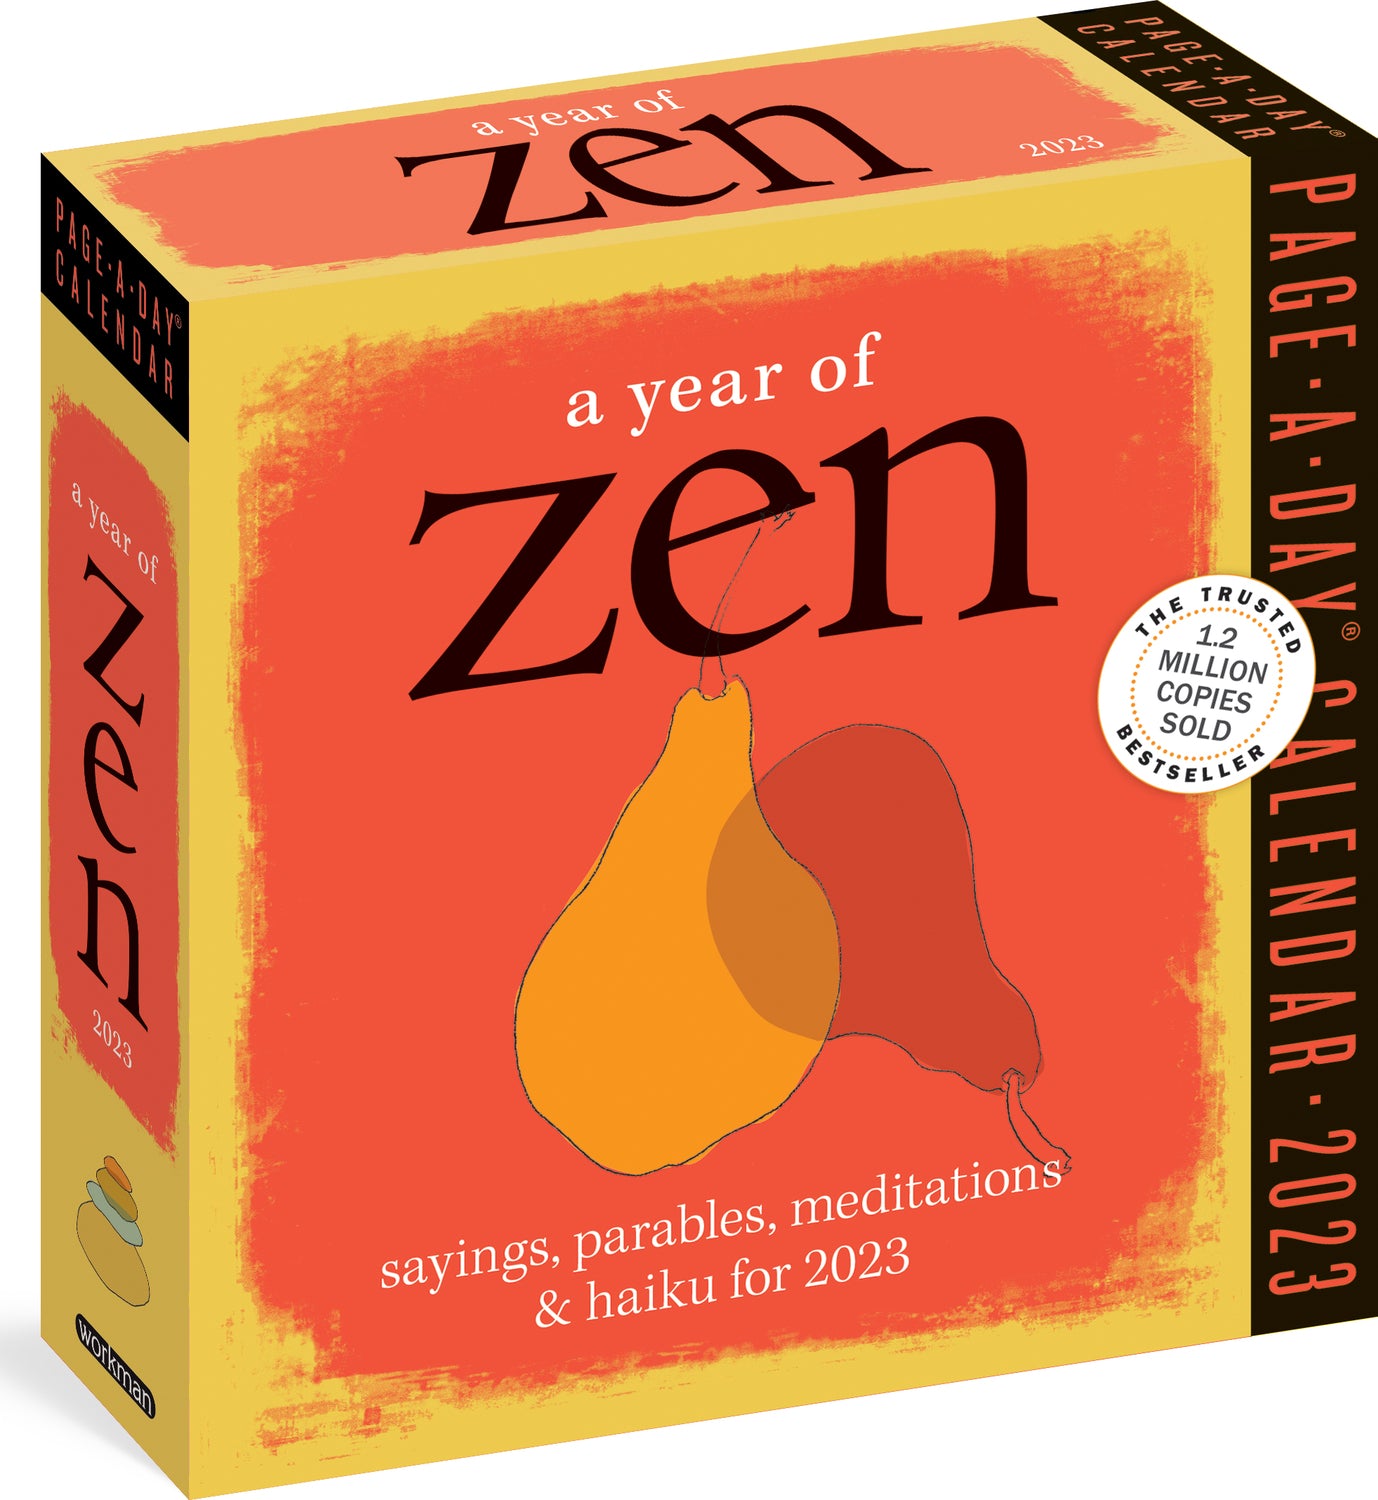 A Year of Zen Page-A-Day Calendar 2023: Sayings, Parables, Meditations & Haiku for 2023